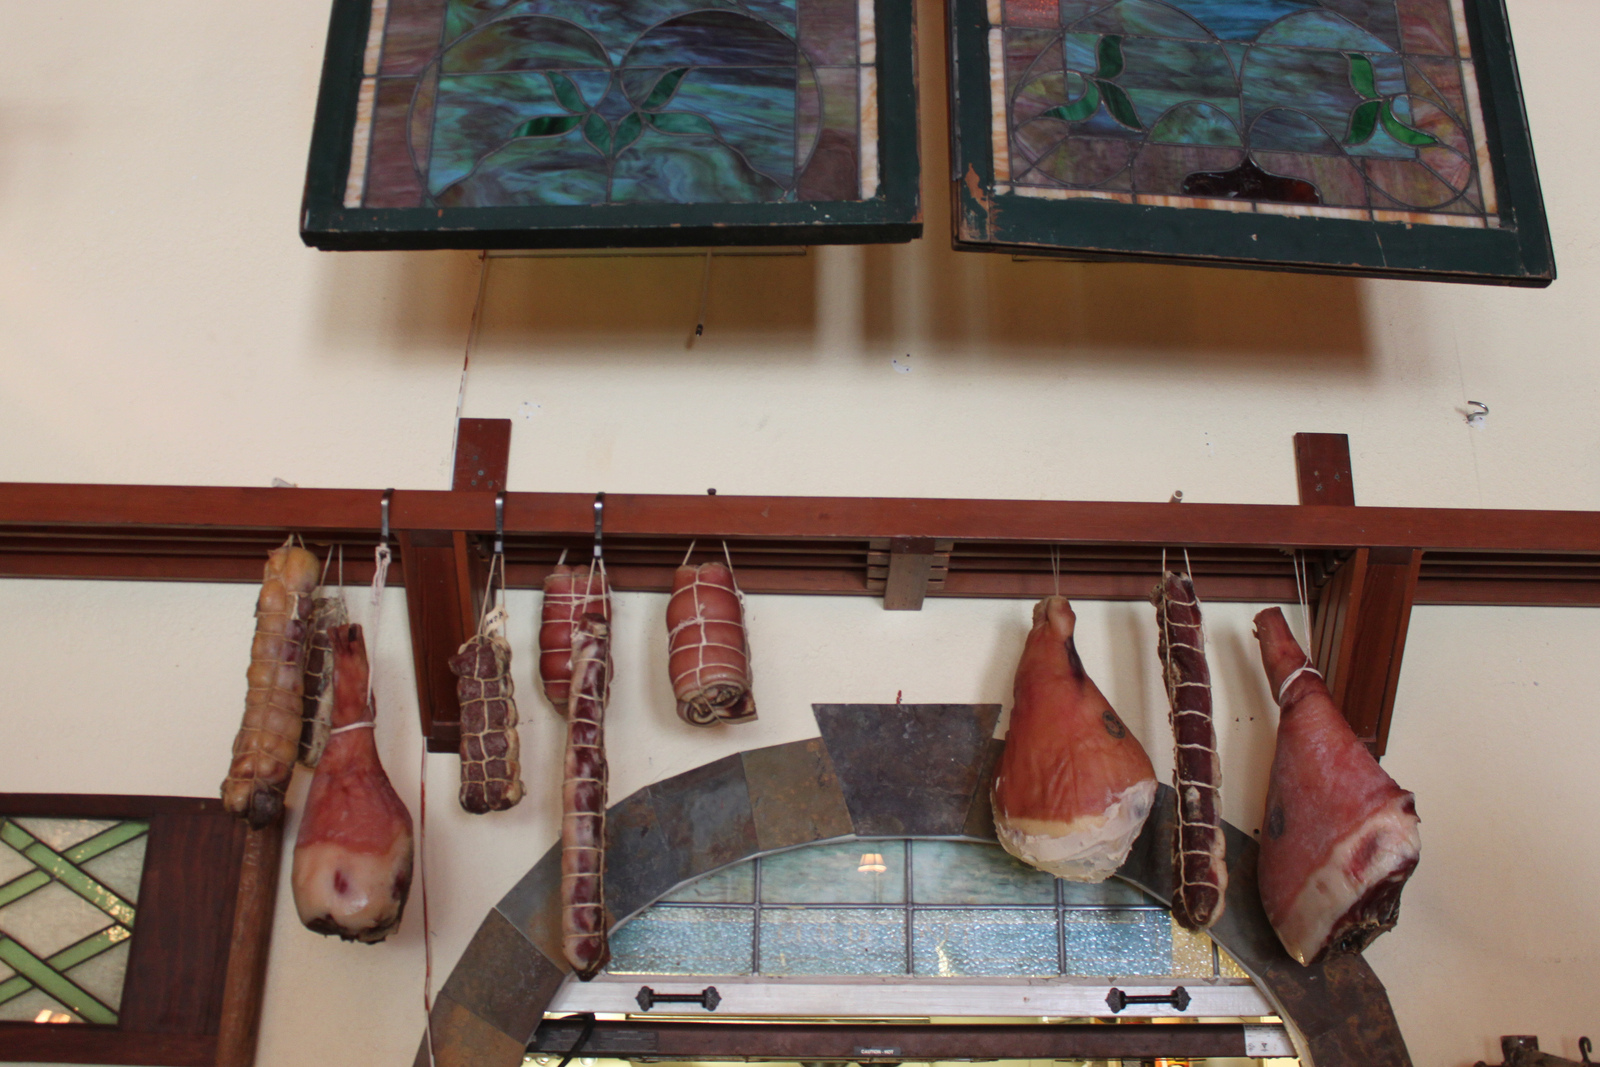 dry cured meats